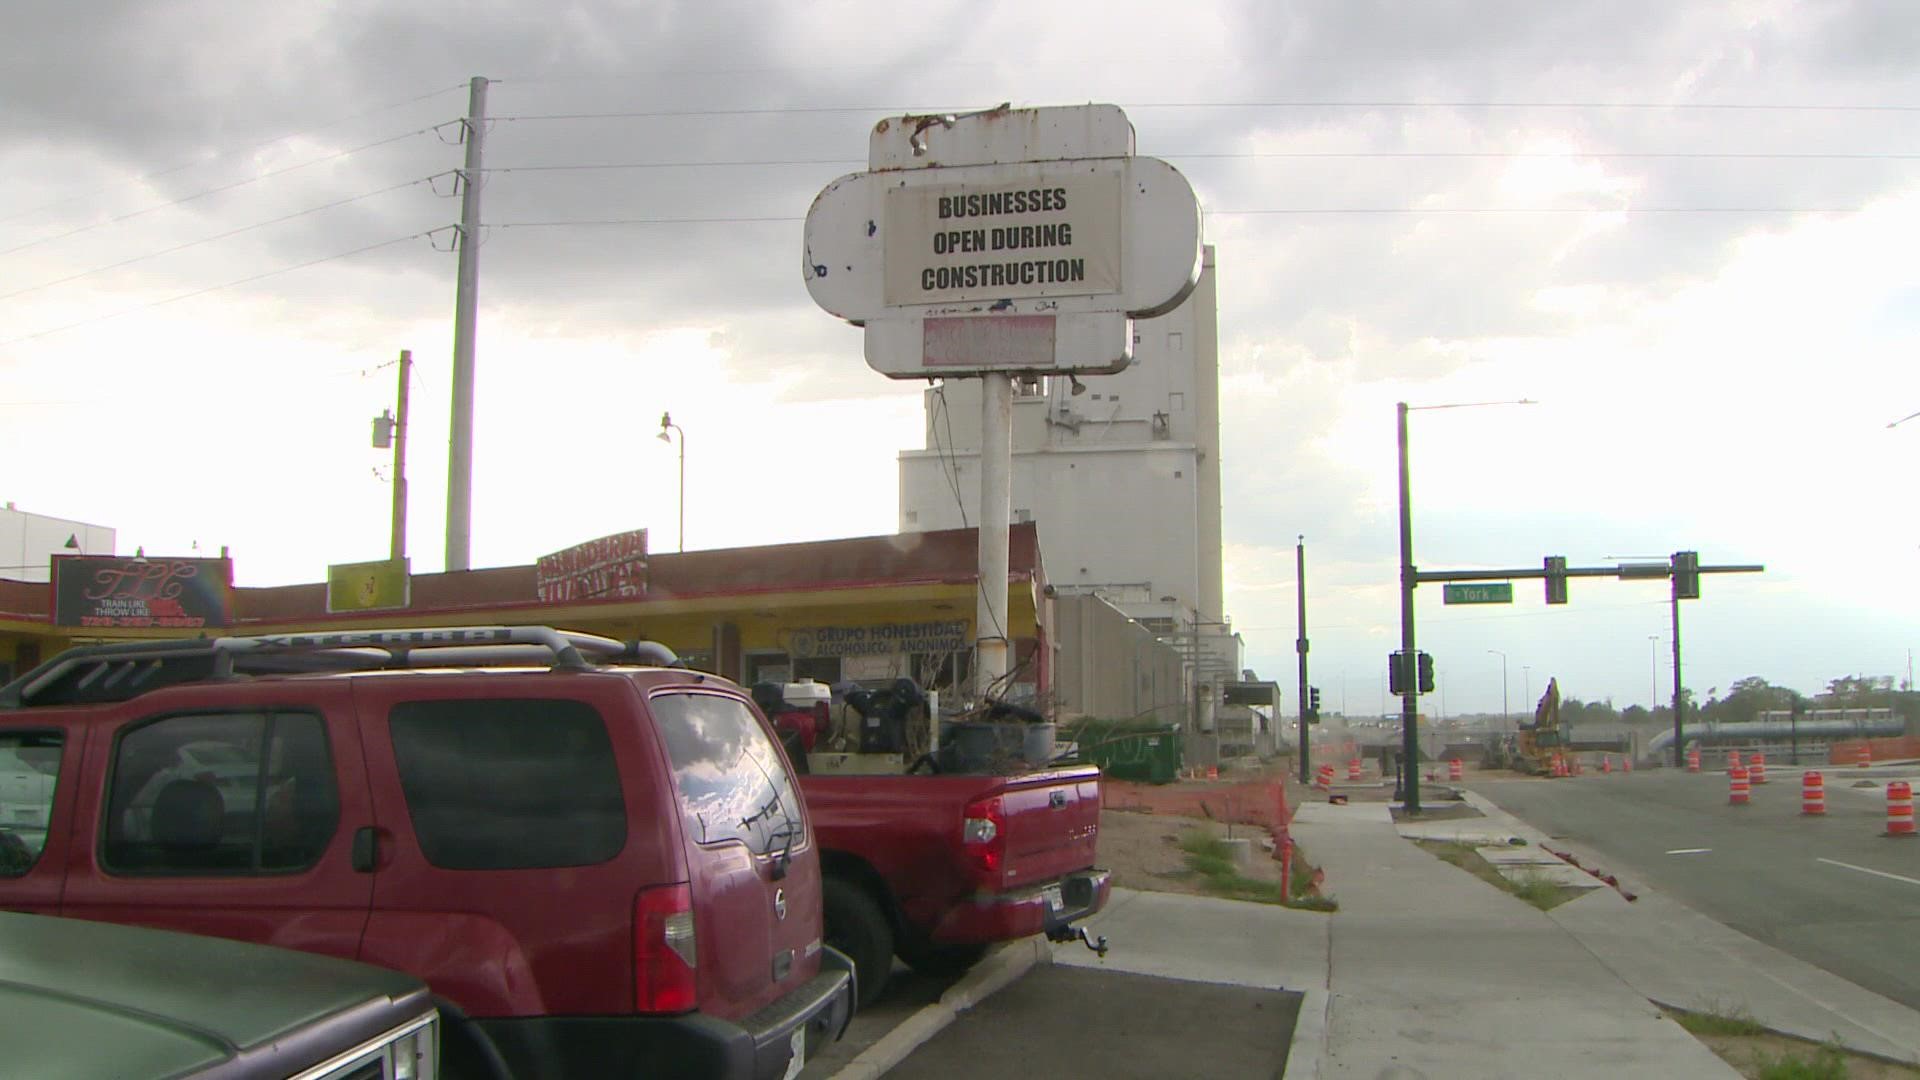 9NEWS has spoken with several businesses in the Eleryia-Swansea neighborhood that say they have had to adapt to the construction of I-70.